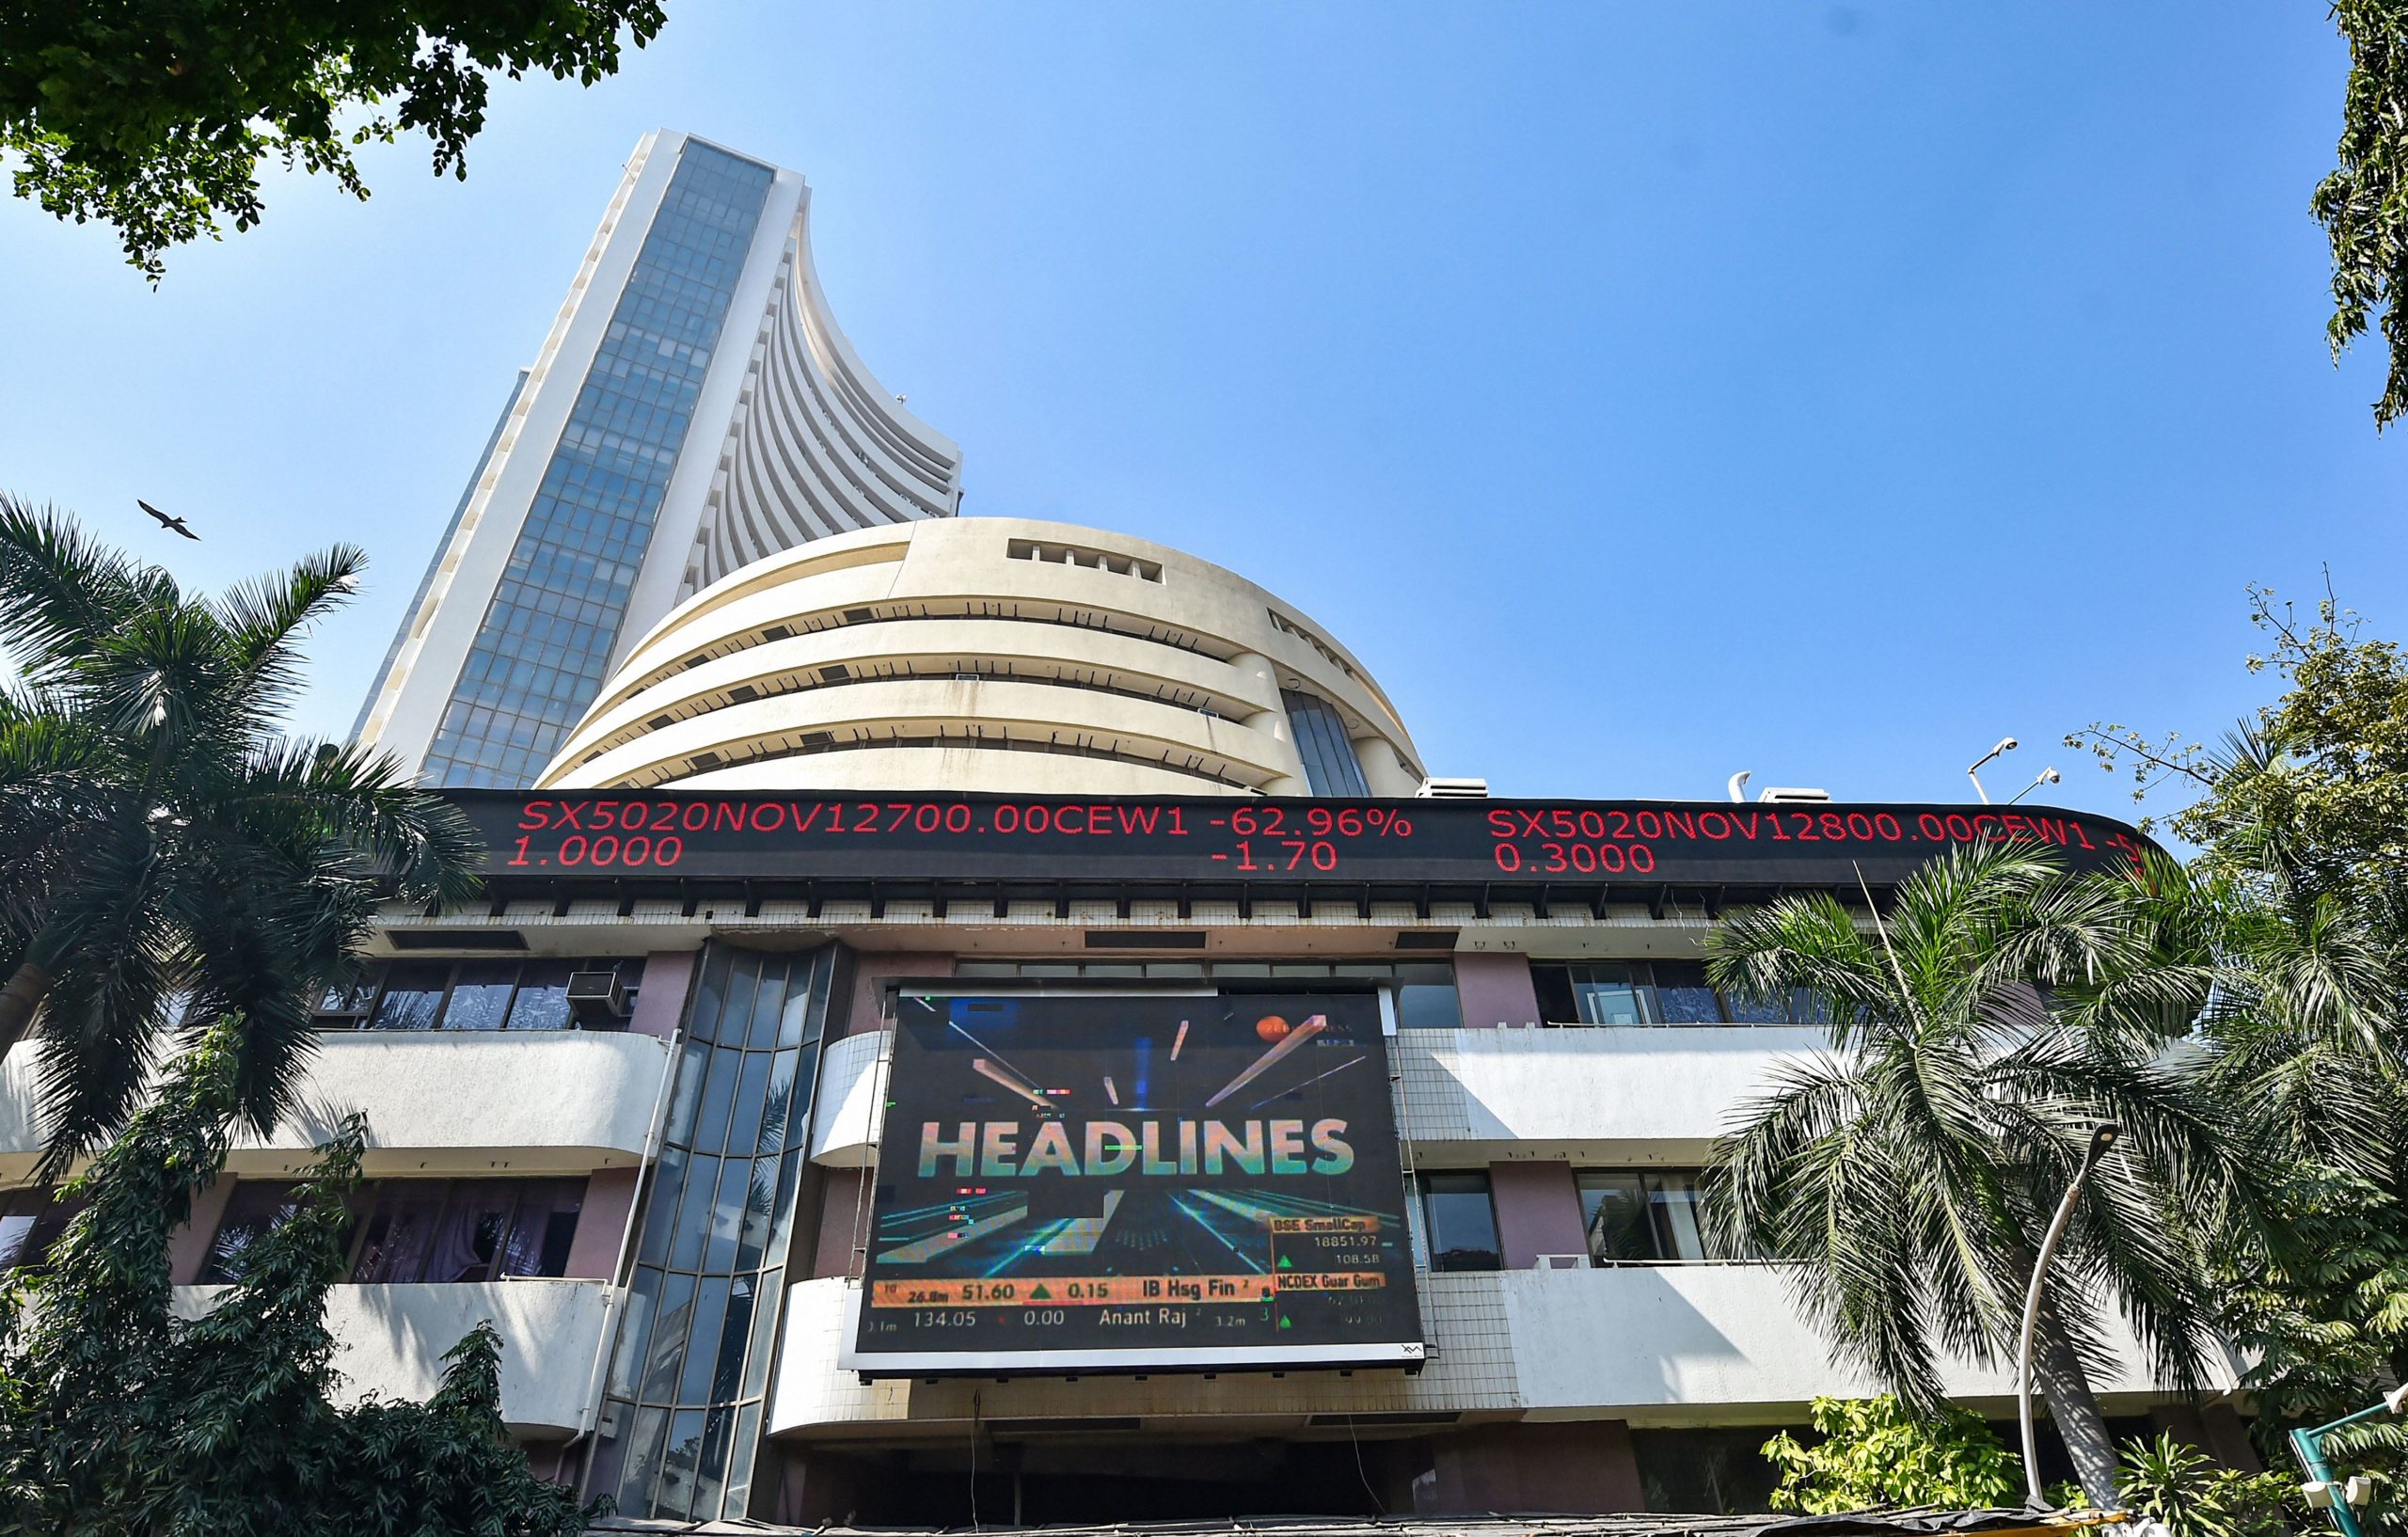 Trending Stocks: Titan, Reliance, Power Grid and others in news today